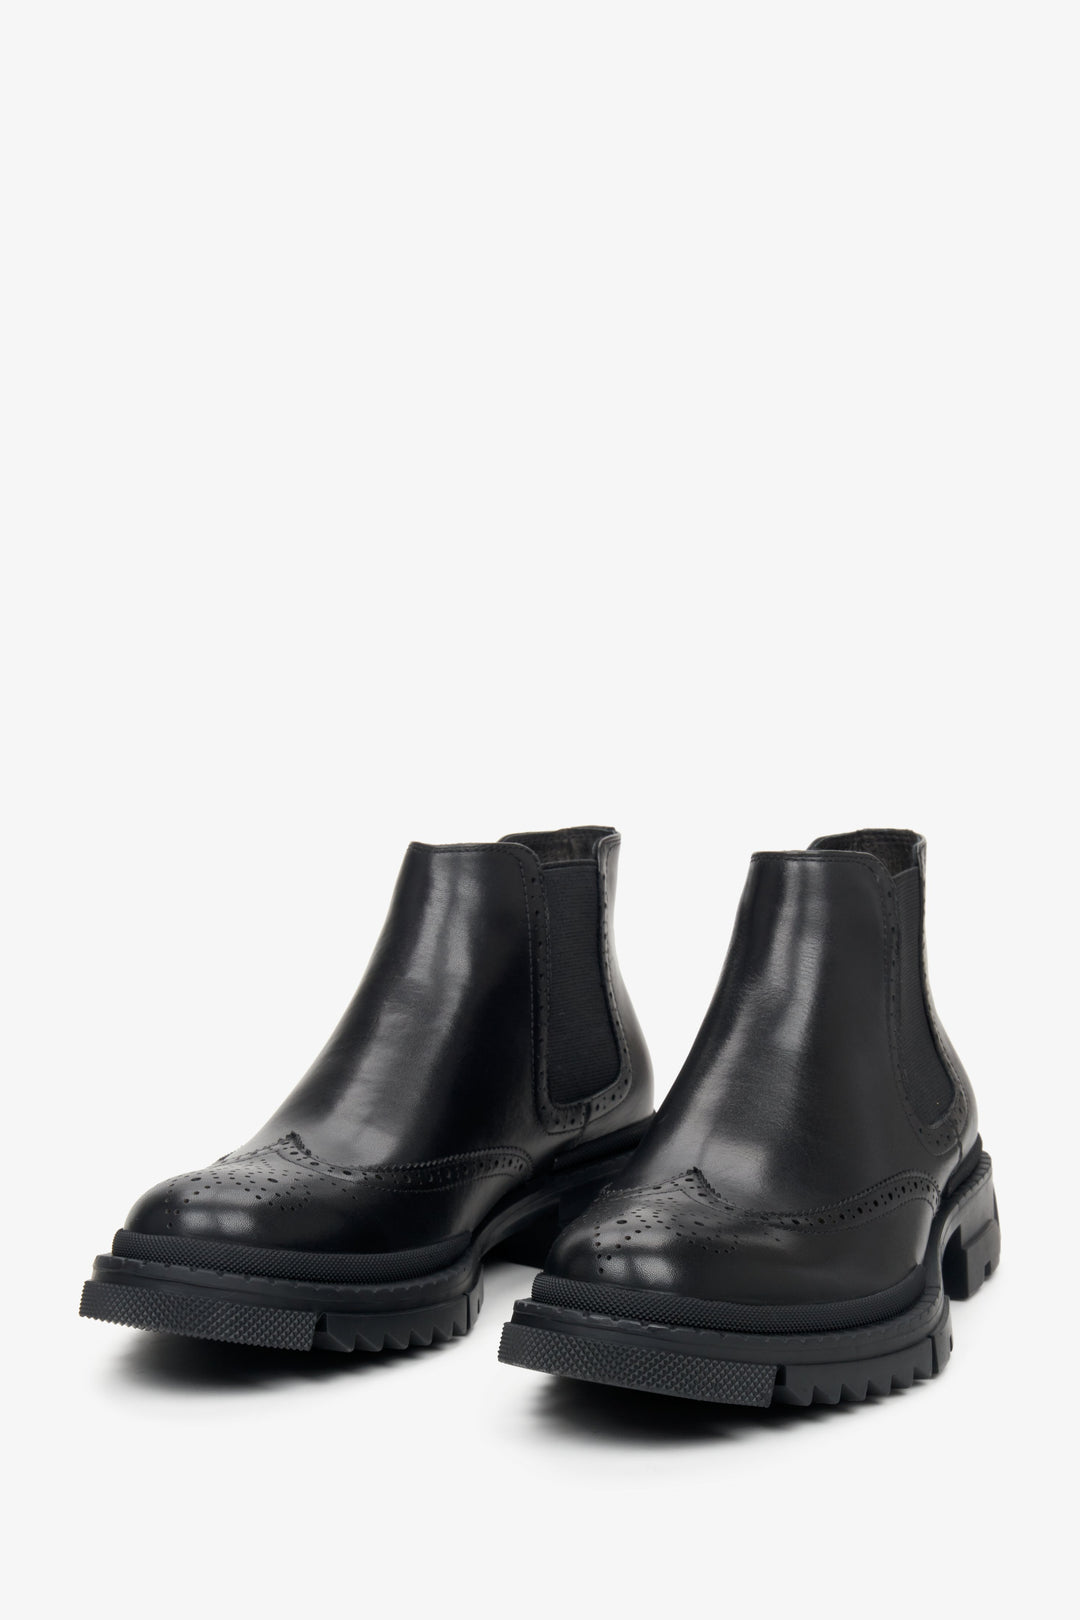 Versatile men's black ankle boots made from genuine leather by Estro - close-up on the toe of the boots.